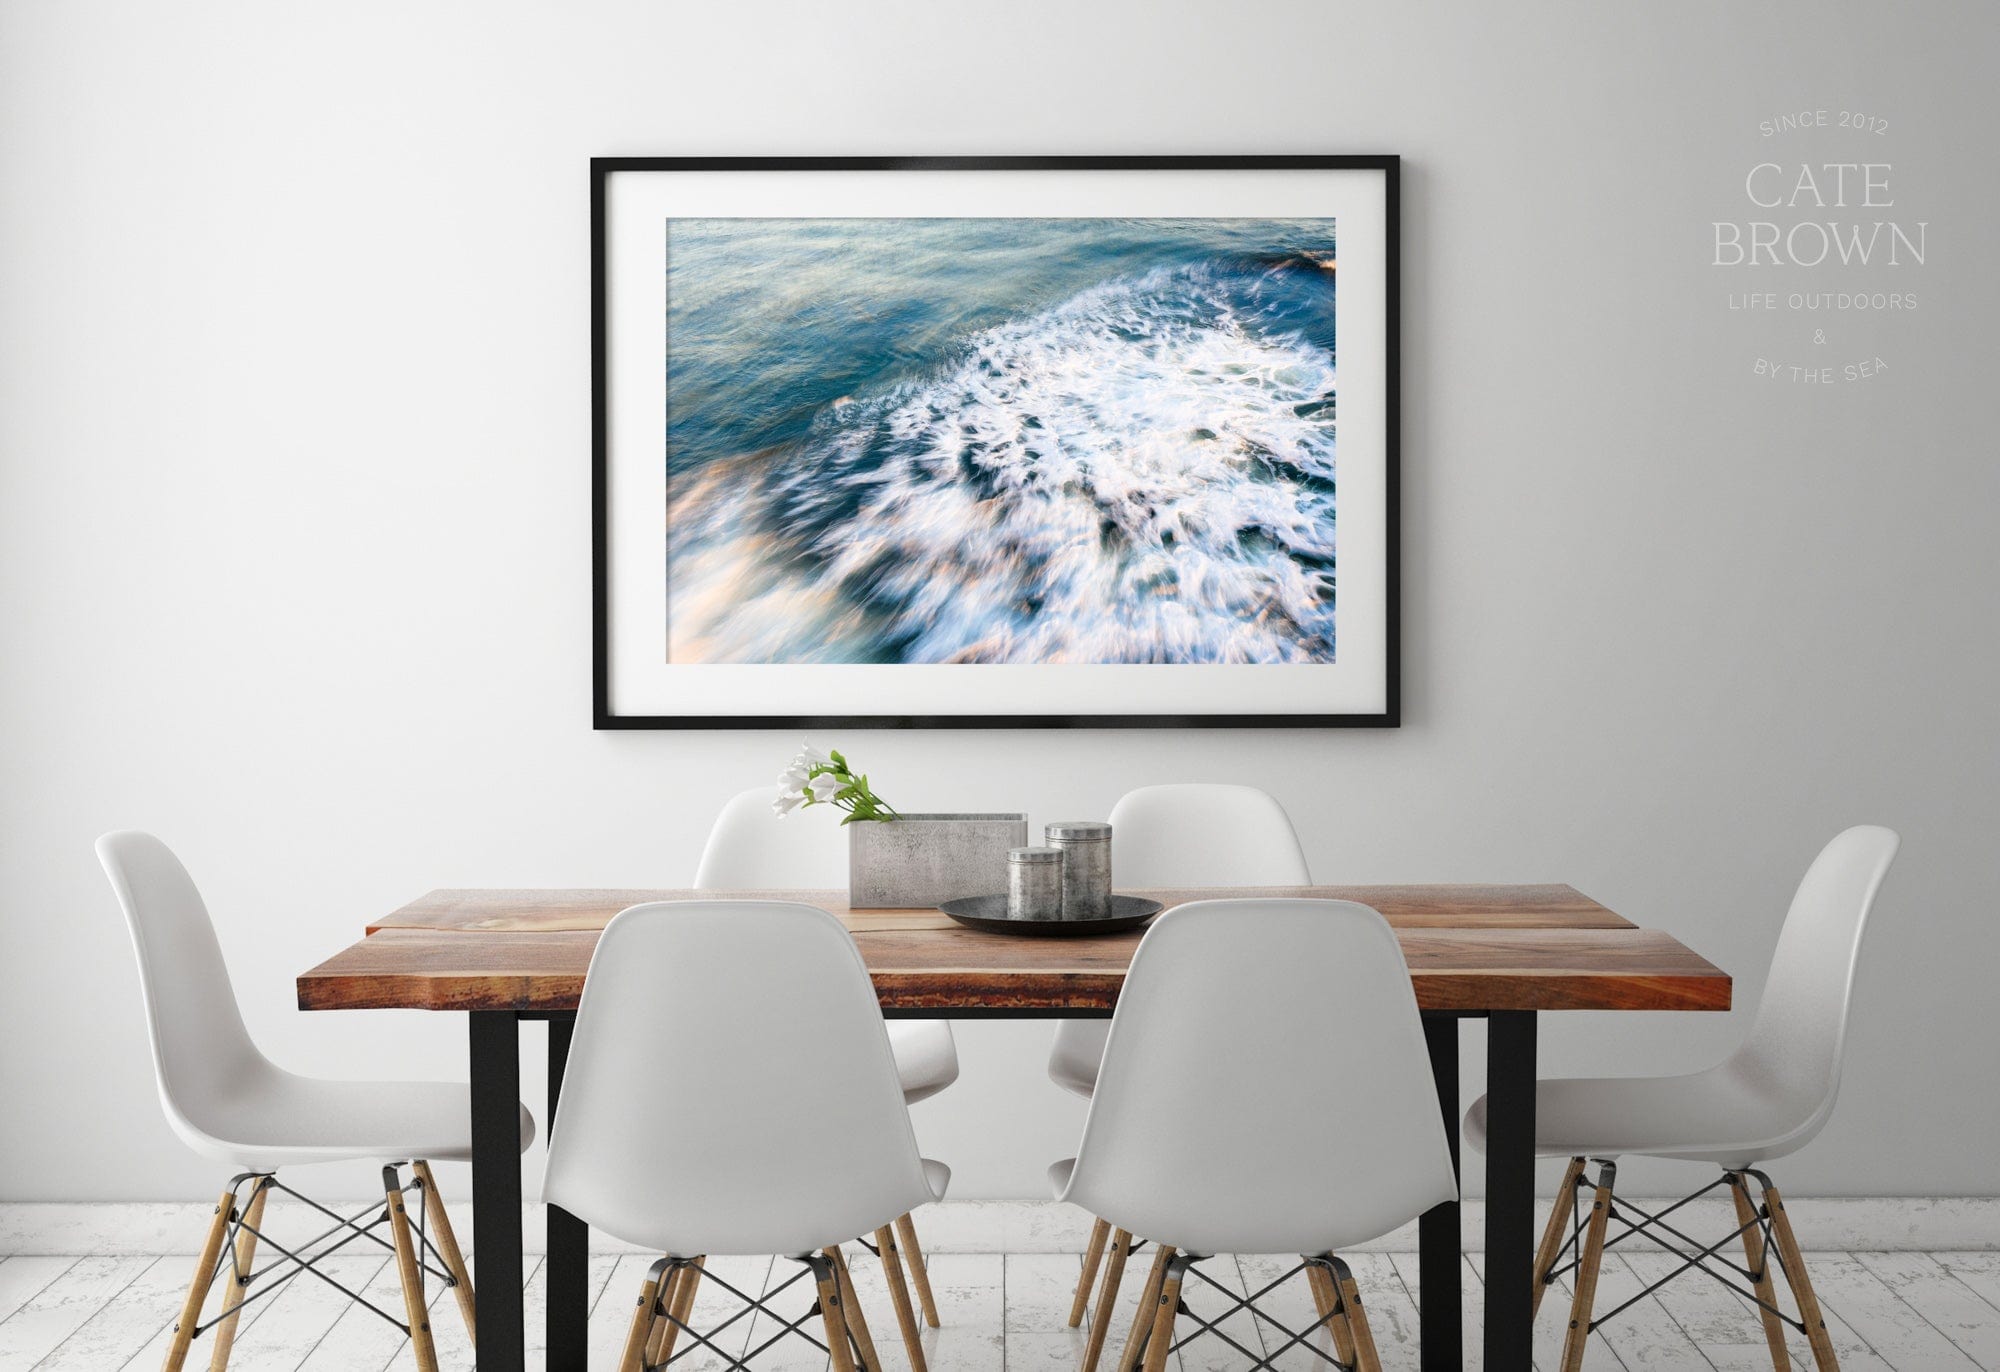 Cate Brown Photo Fine Art Print / 8"x12" / None (Print Only) Beavertail Soft #2  //  Aerial Photography Made to Order Ocean Fine Art